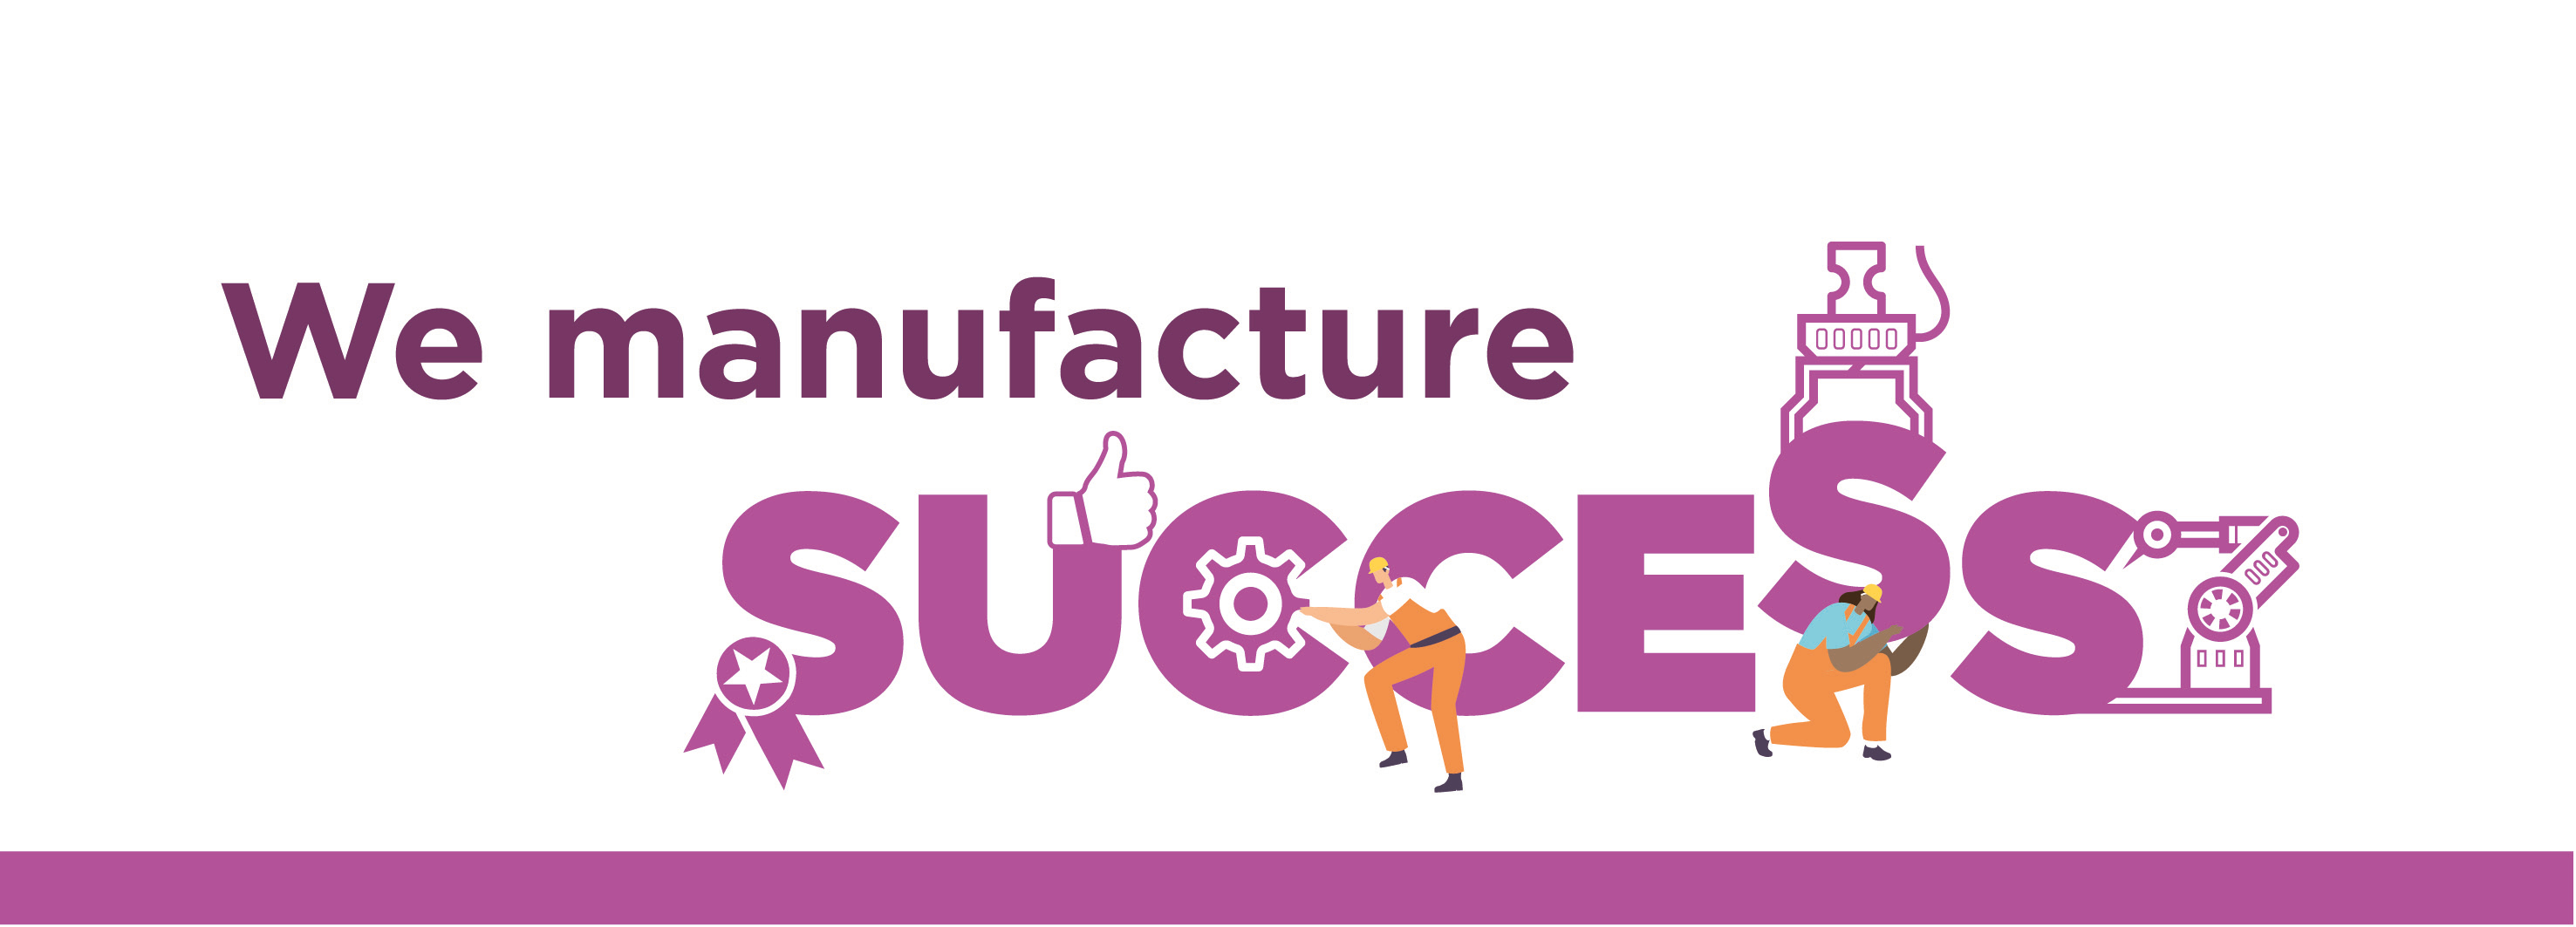 We manufacture success banner